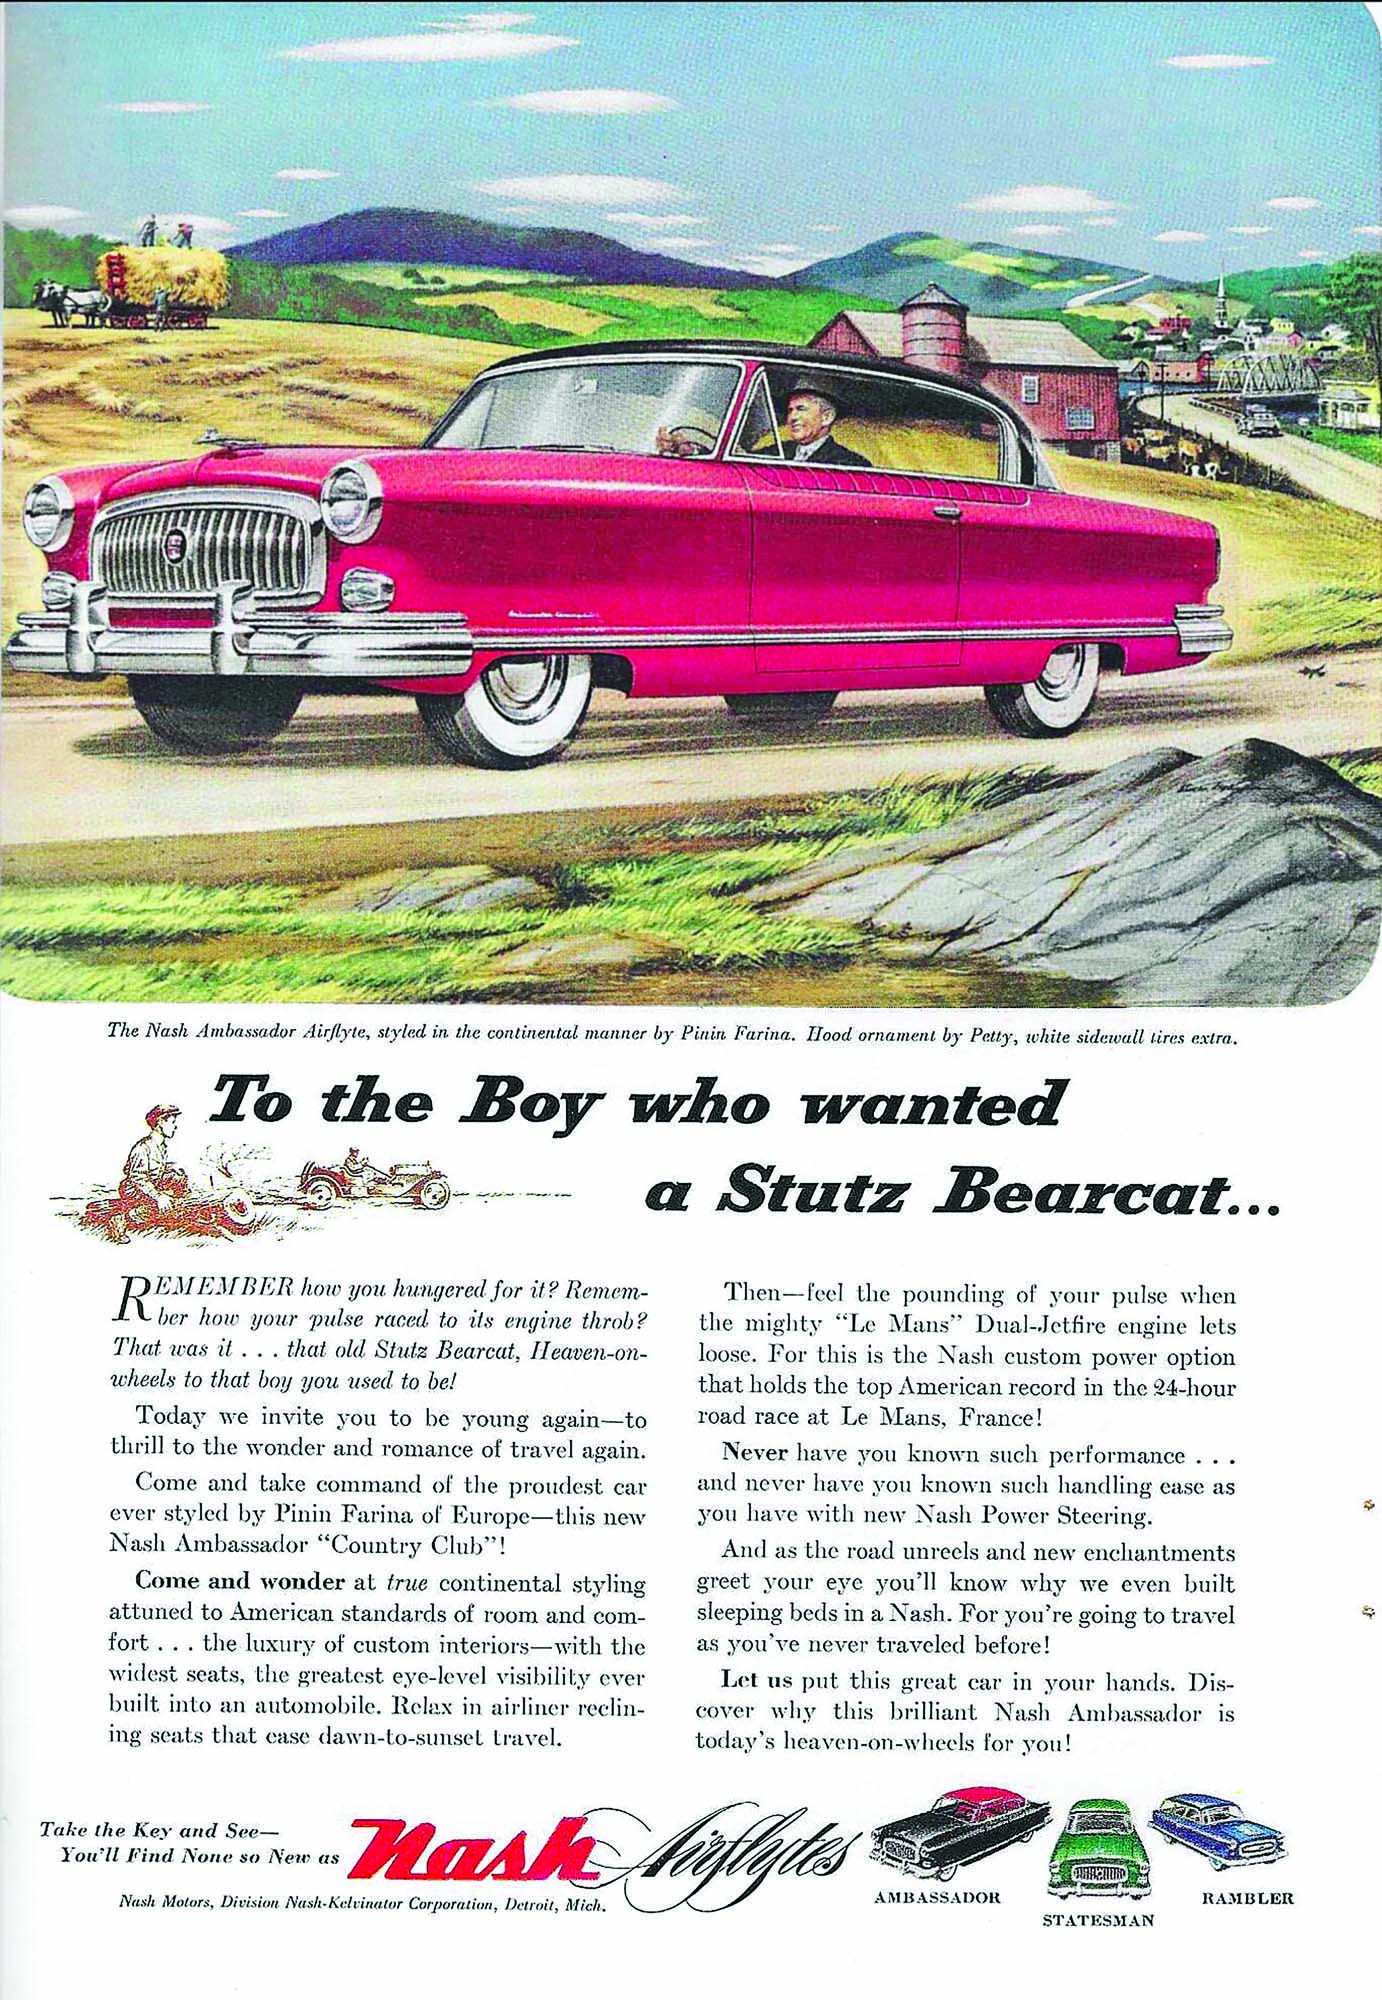 The Wonder And Romance Of Travel In Your 1953 Nash